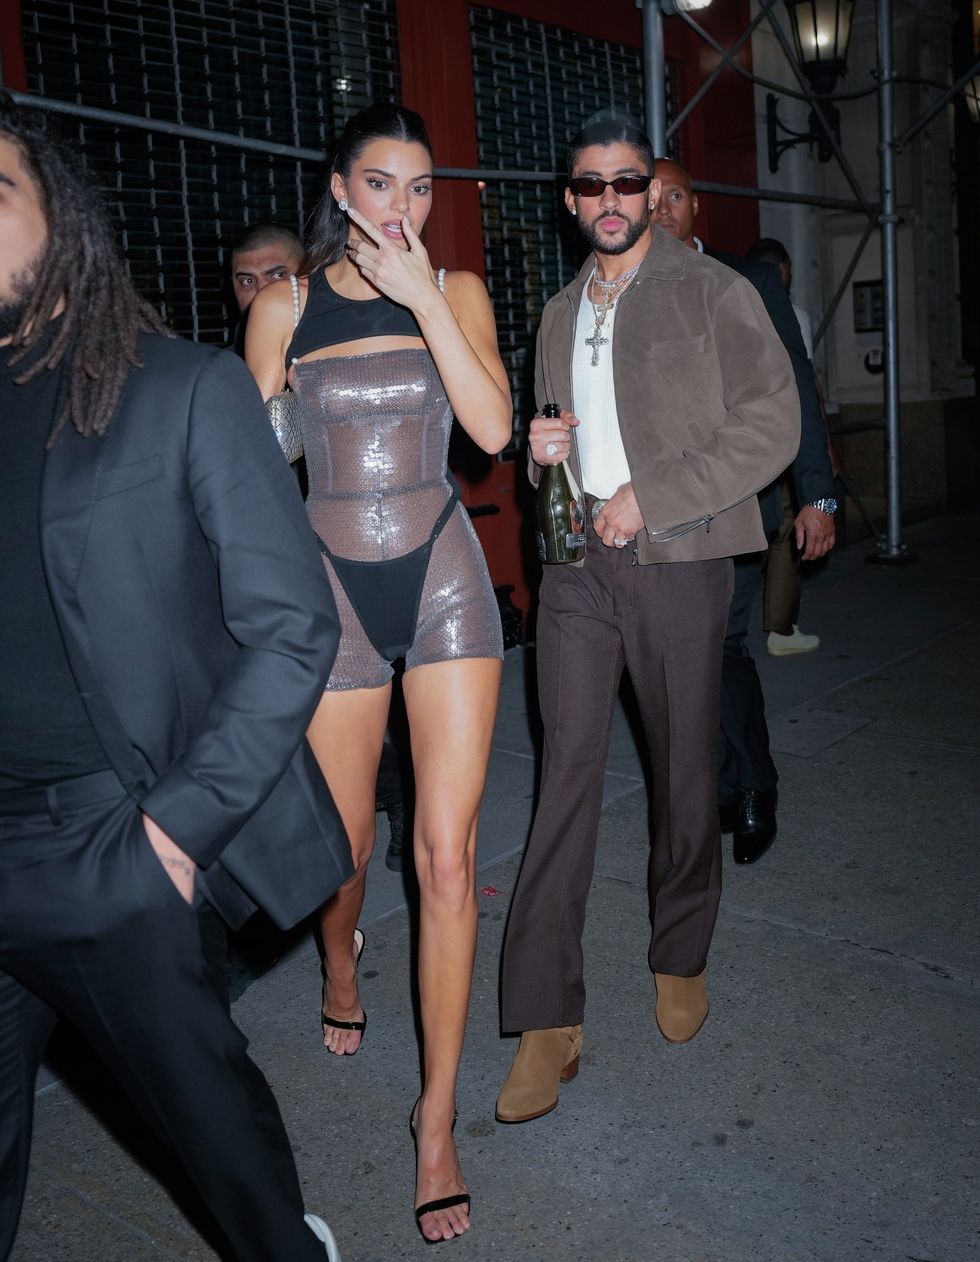 Kendall Jenner And Bad Bunny Are Seen Heading To A Met Gala News Photo 1689939662 ?resize=980 *